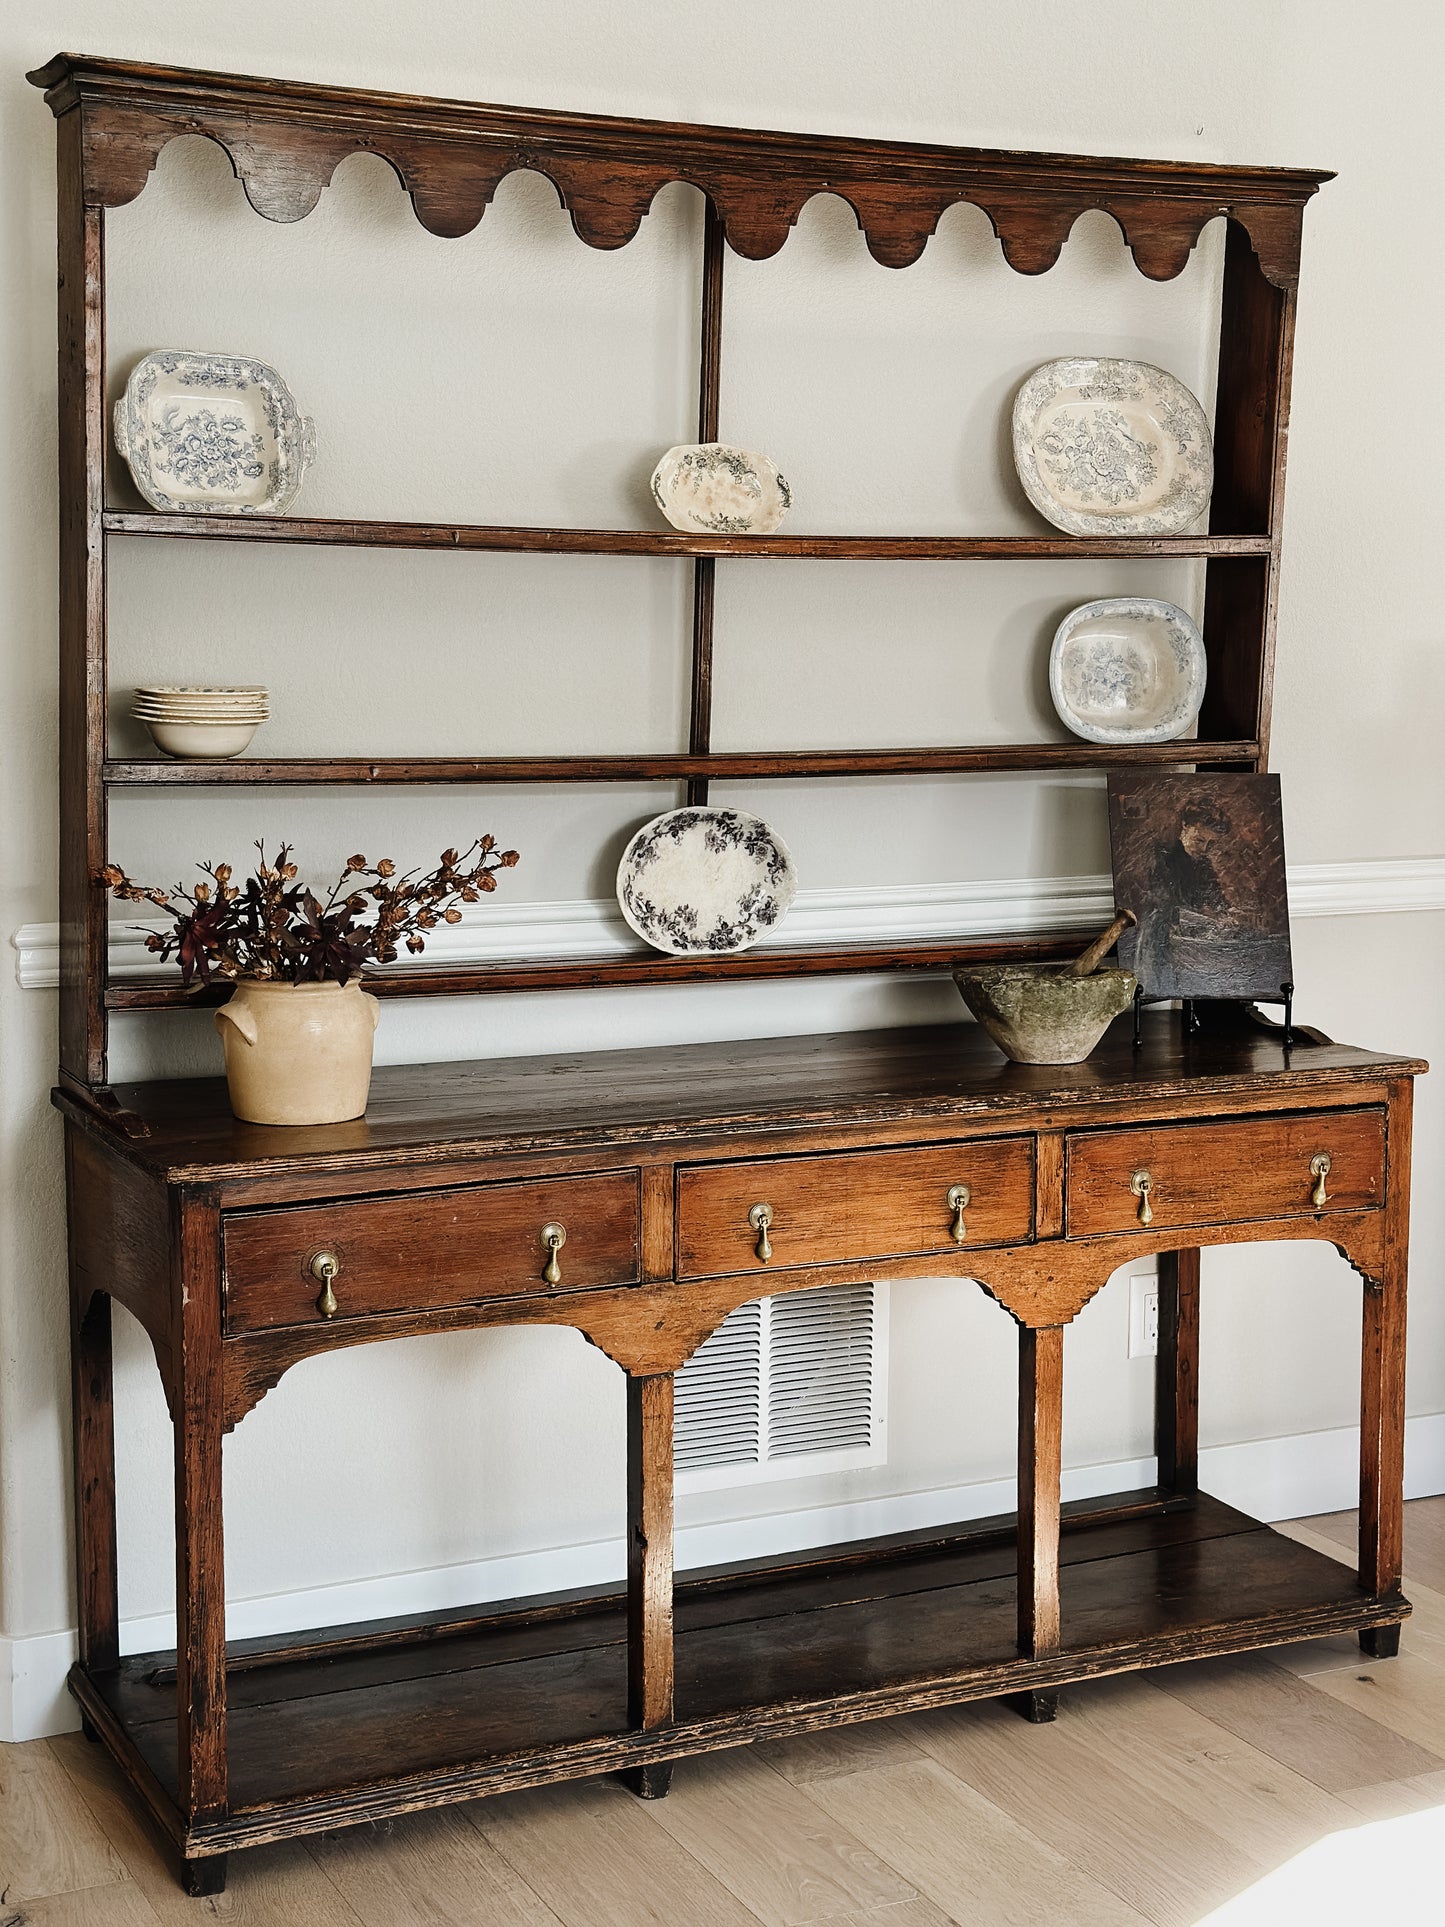 Antique Late 18th/Early 19th Century Welsh Hutch/Sideboard Plate Rack